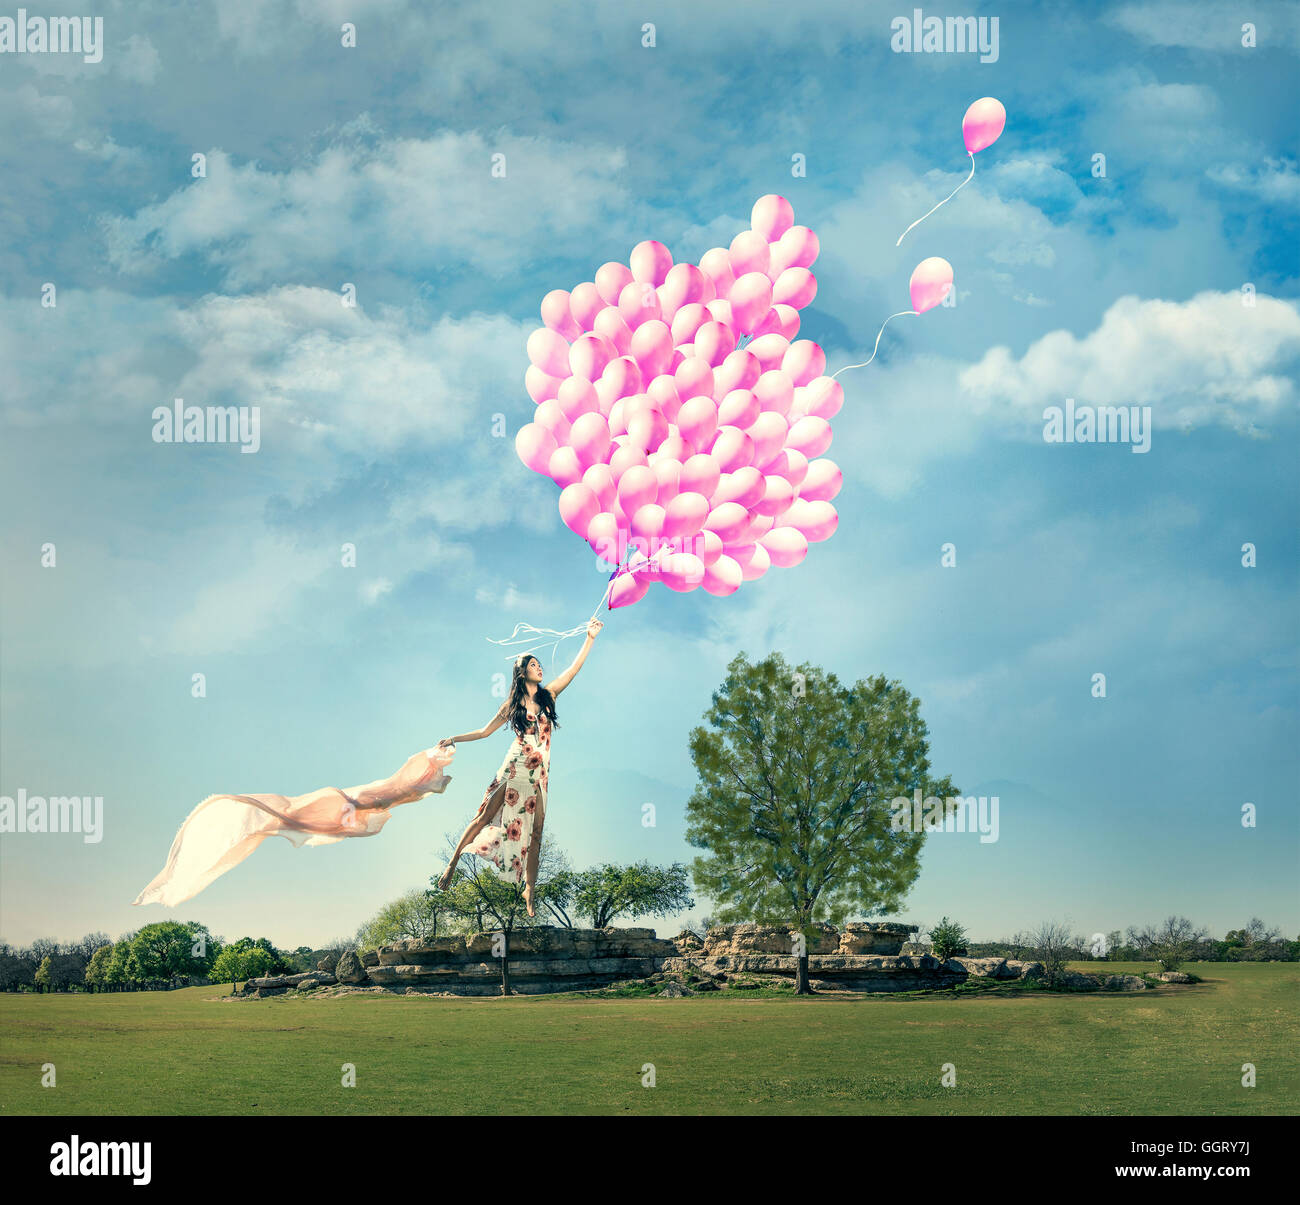 Chinese woman being lifted in field by bouquet of pink balloons Stock Photo